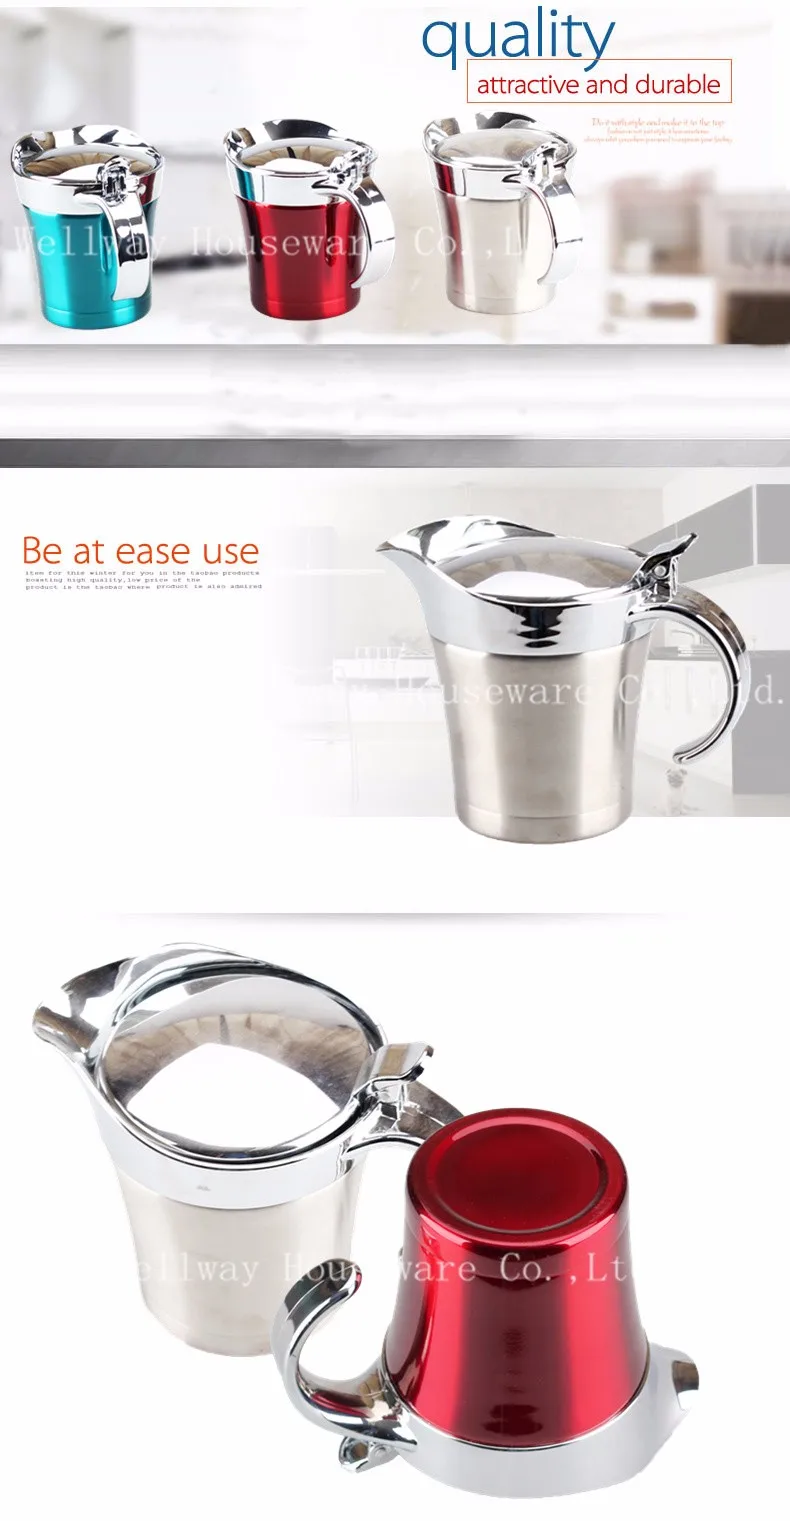 Nesee Stainless Steel Gravy Boat Sauce Jug with Lid Storage for Gravy or Cream Used at Home & Kitchen Double Wall Insulated